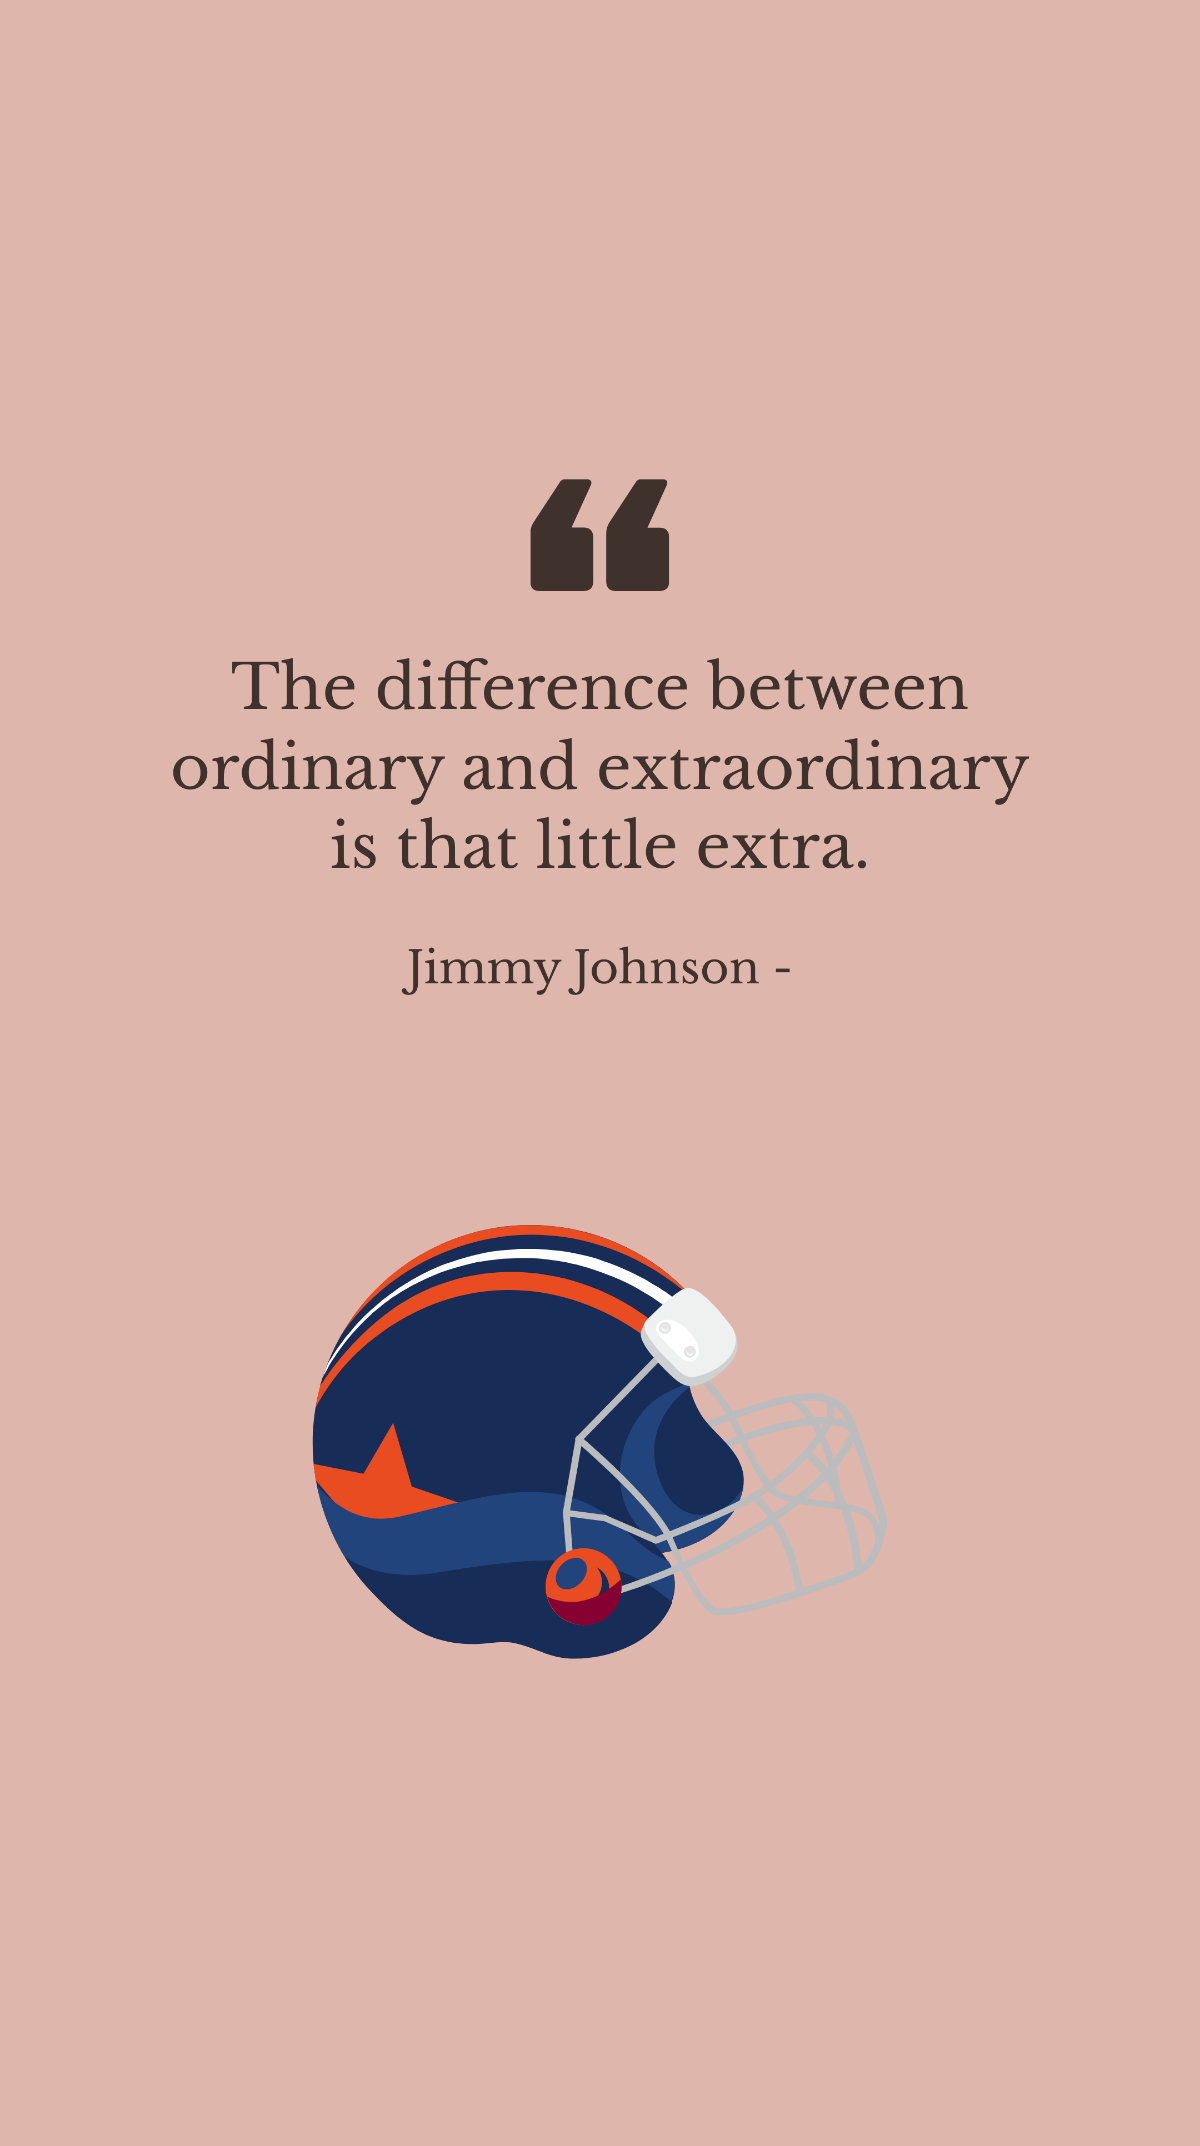 Jimmy Johnson - The difference between ordinary and extraordinary is that little extra. Template